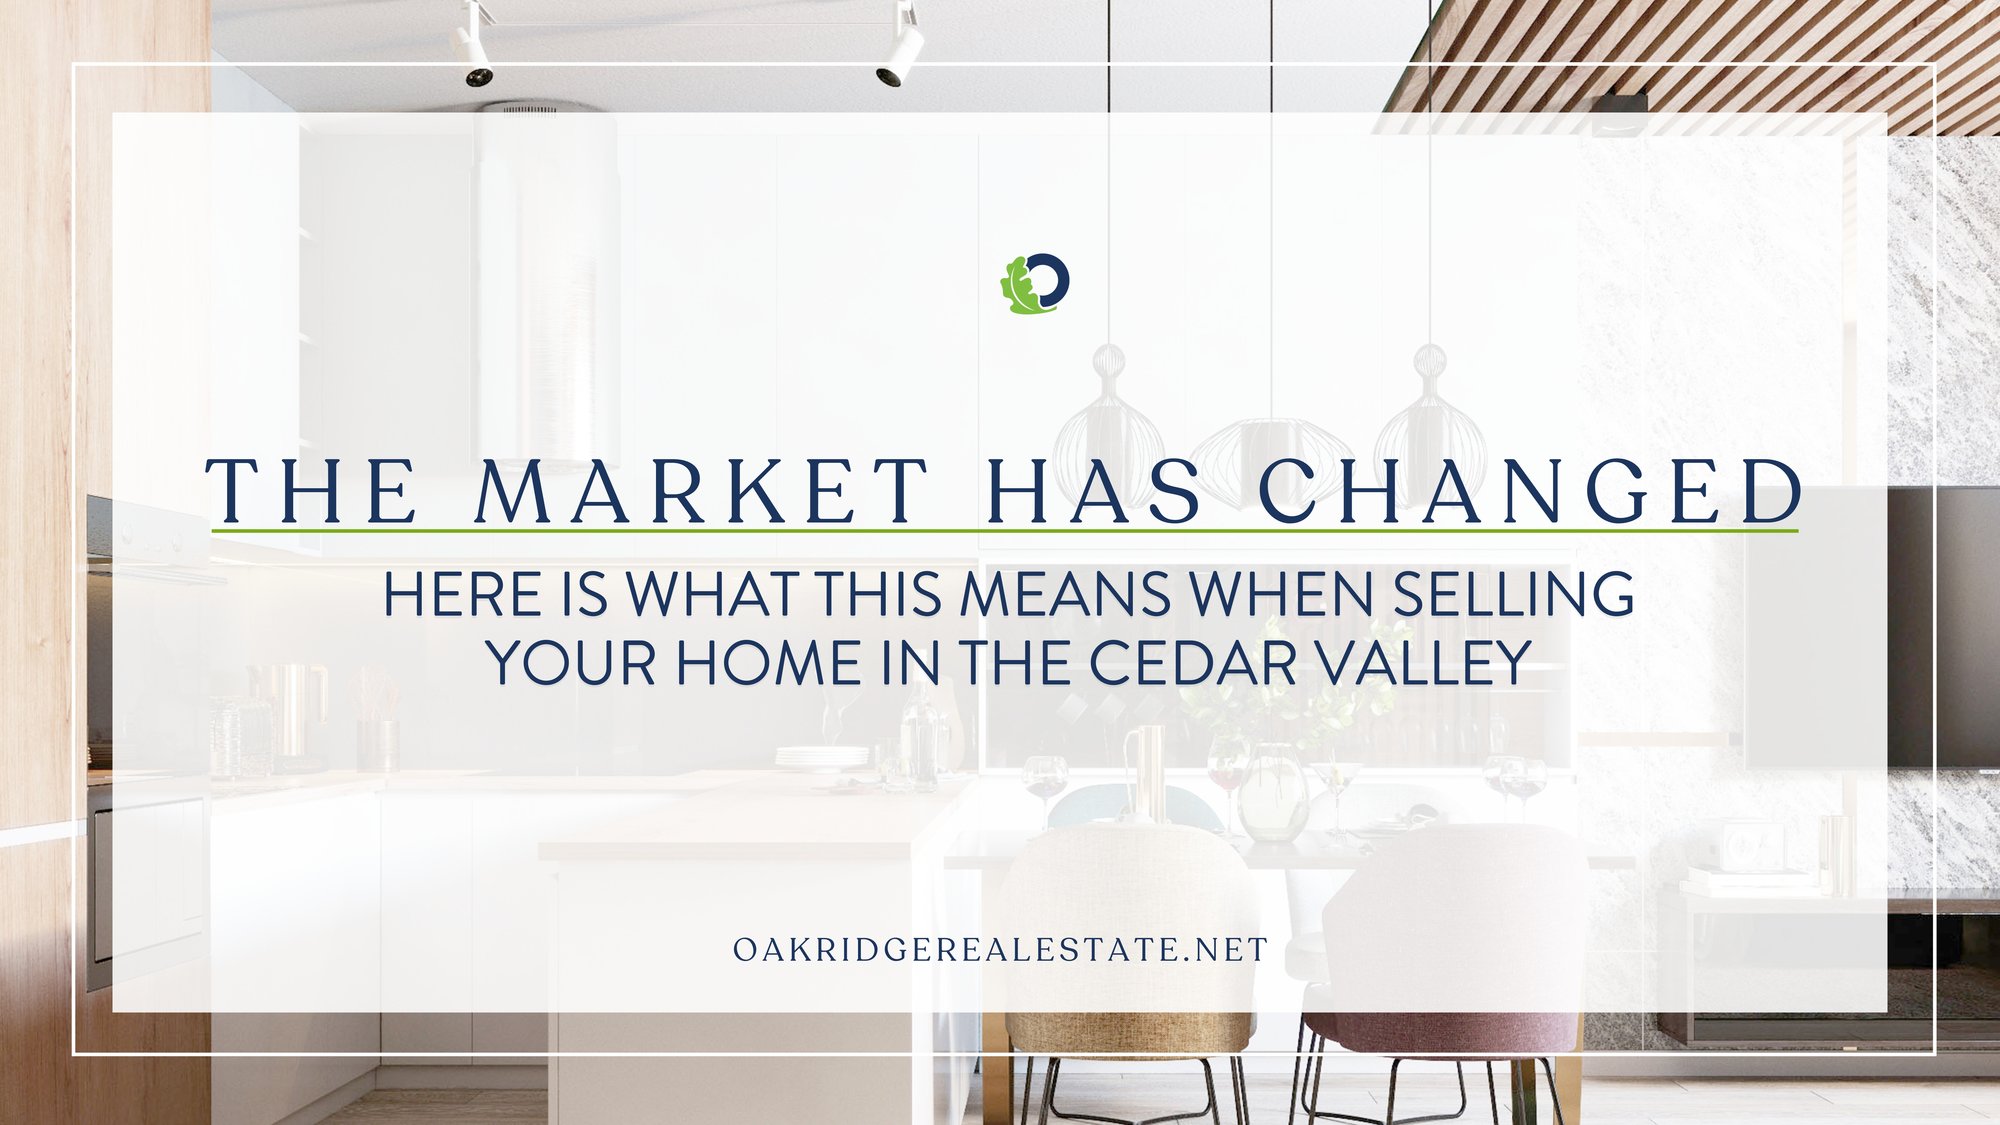 The Housing Market Has Shifted. What to Know when Selling a House in the Cedar Valley